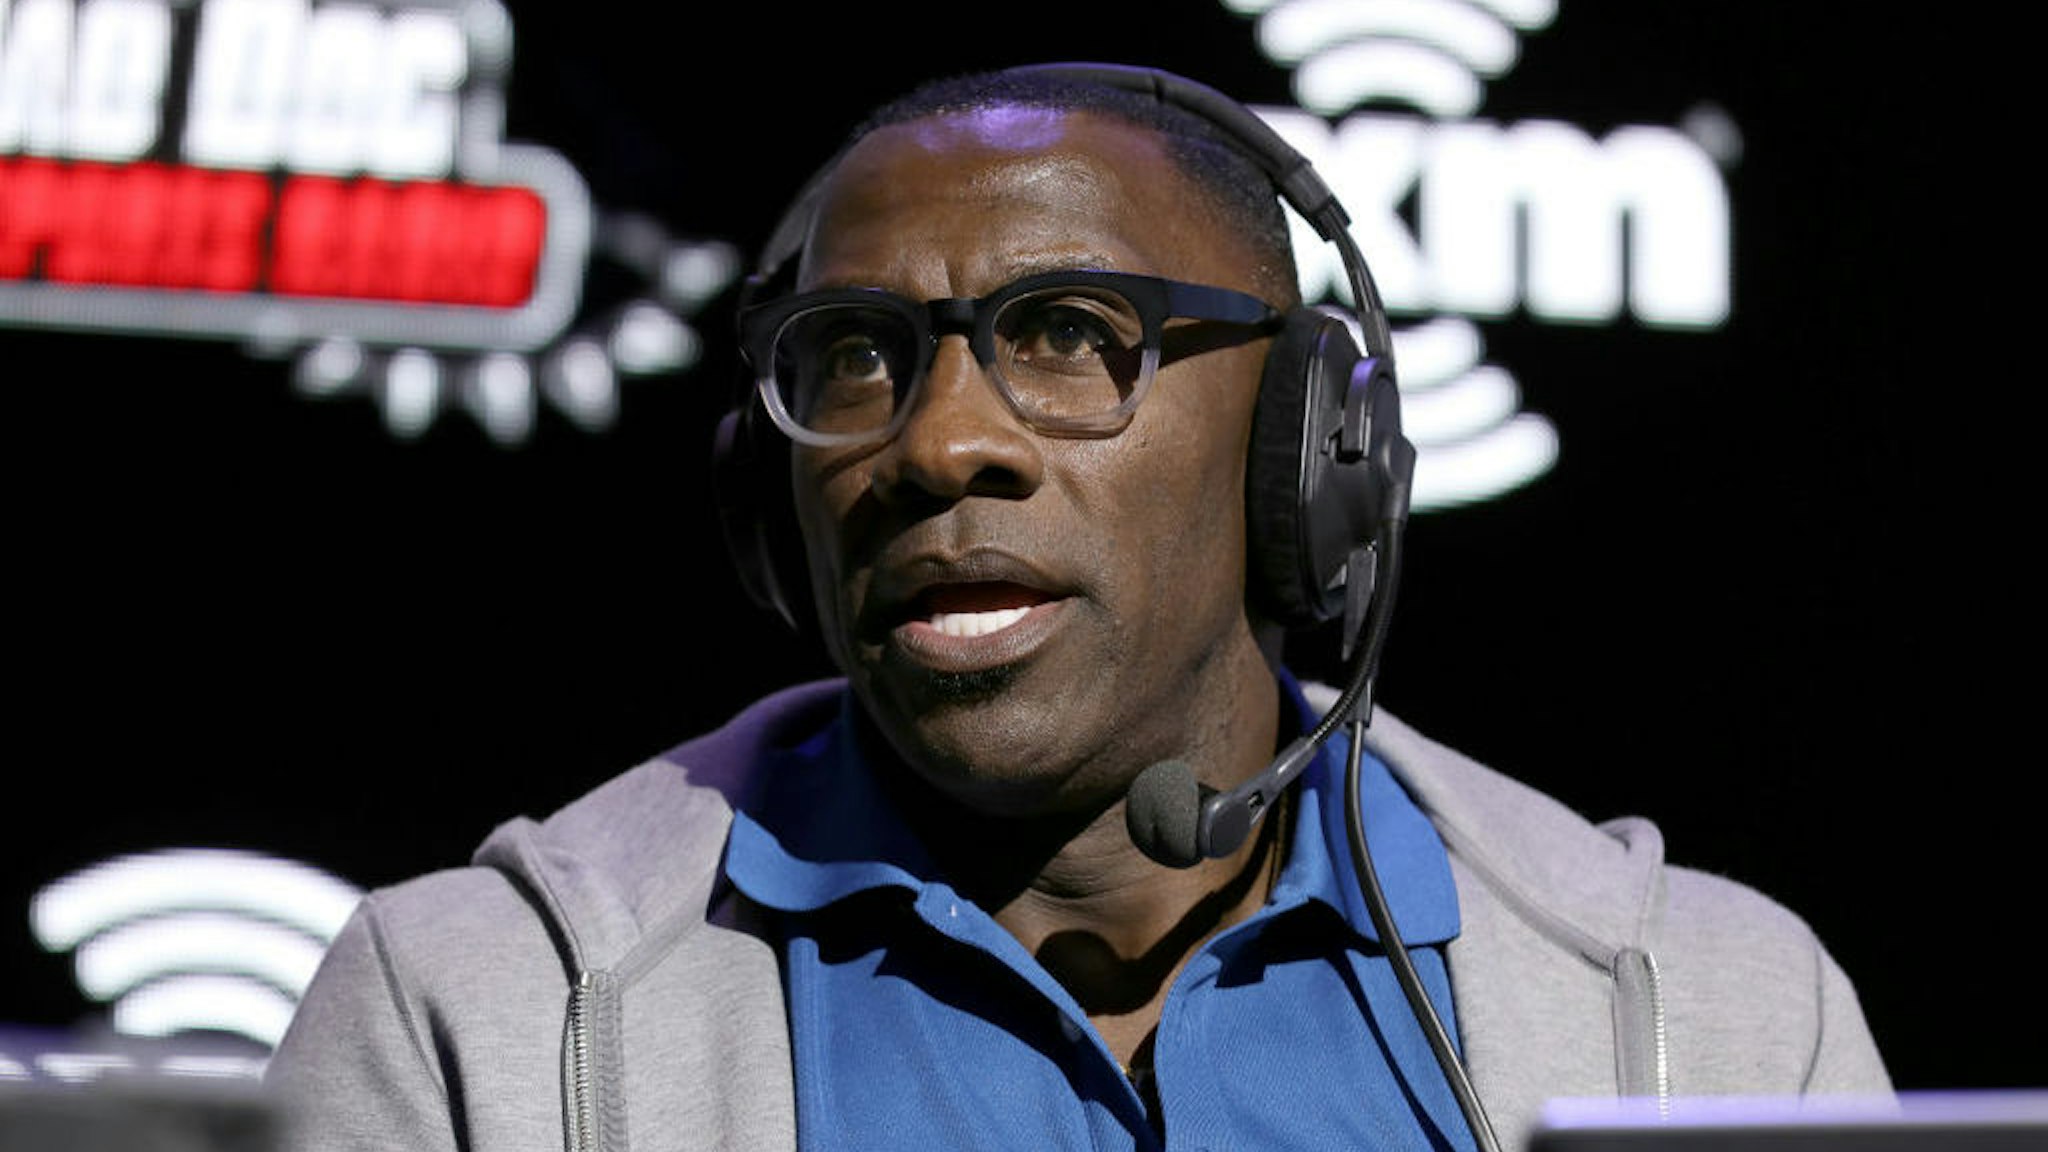 MIAMI, FLORIDA - JANUARY 29: Former NFL player Shannon Sharpe speaks onstage during day one with SiriusXM at Super Bowl LIV on January 29, 2020 in Miami, Florida. (Photo by Cindy Ord/Getty Images for SiriusXM )